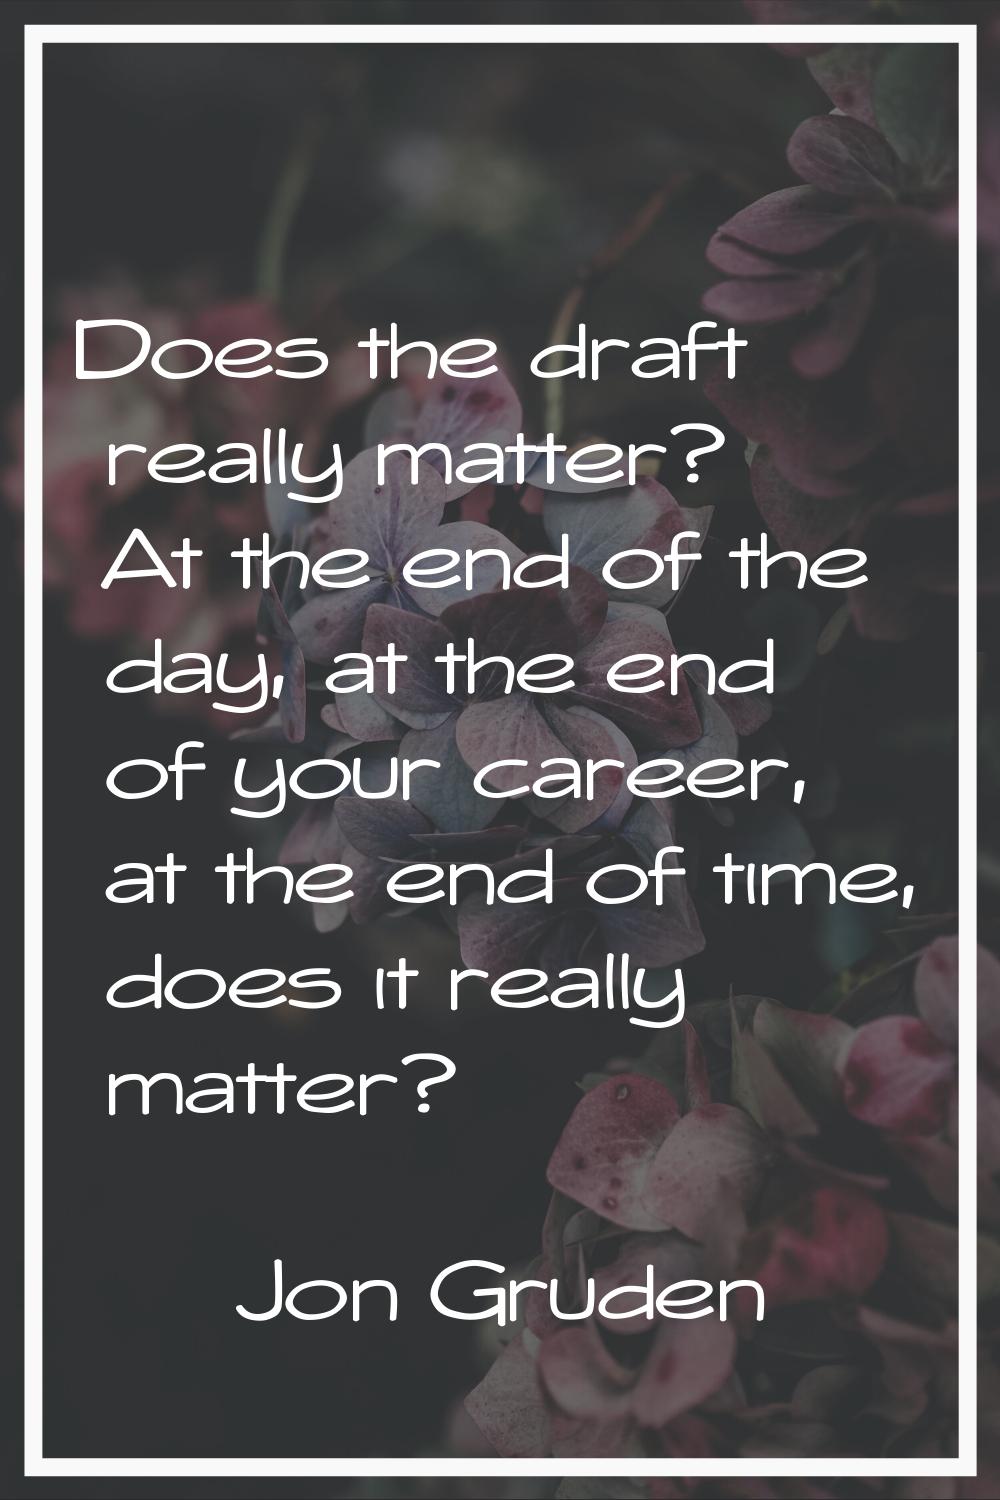 Does the draft really matter? At the end of the day, at the end of your career, at the end of time,